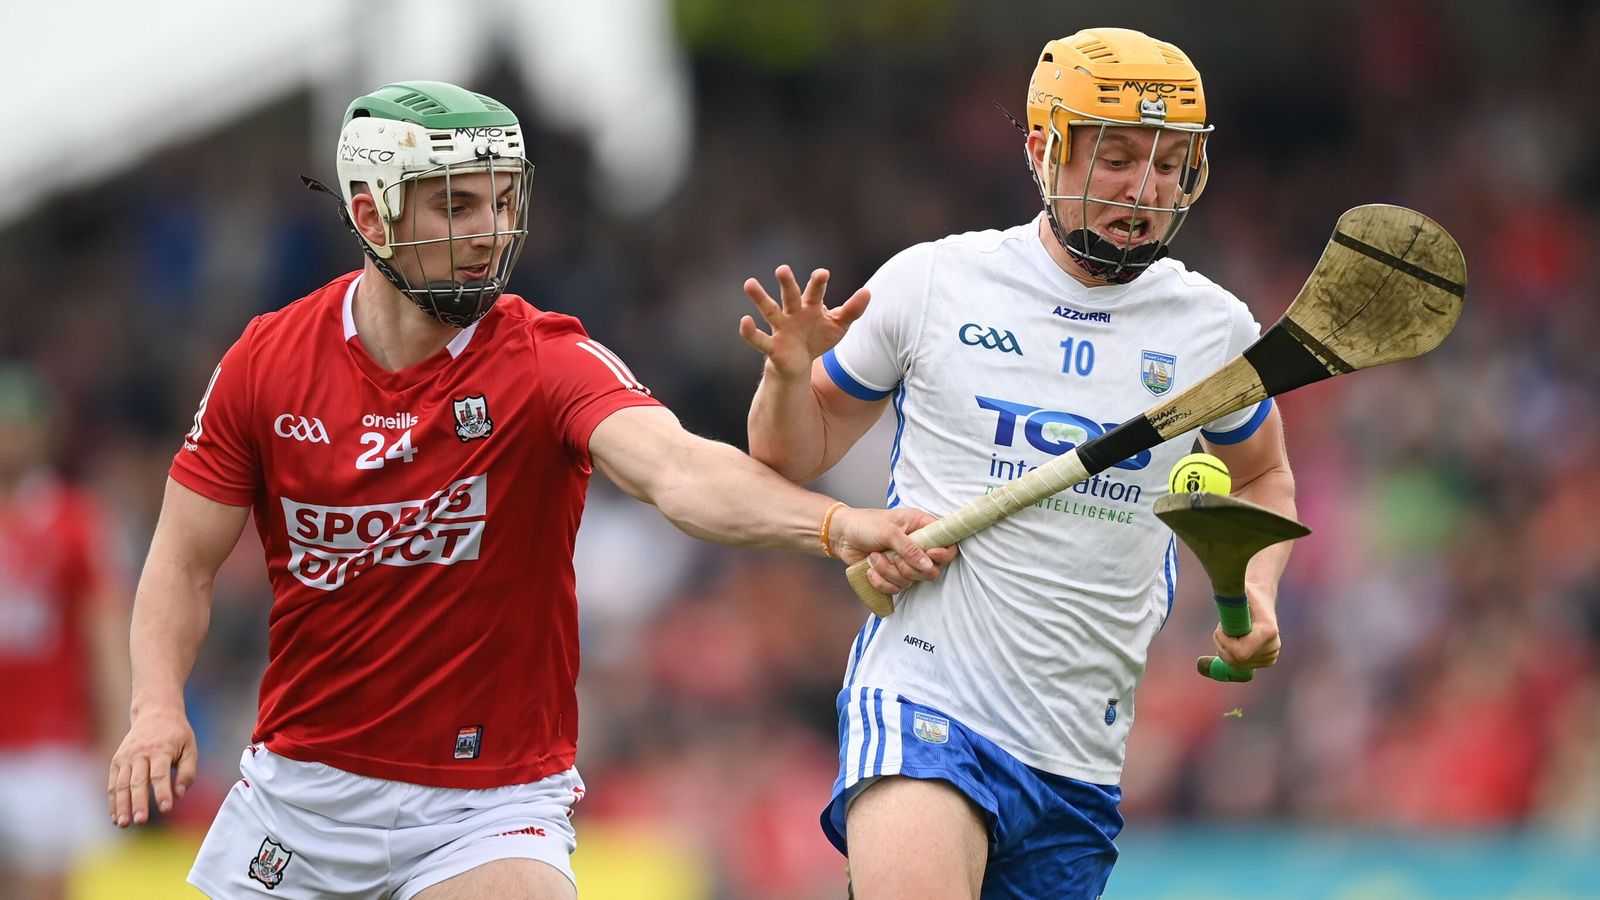 Waterford 1-19 Cork 2-22: Rebels stun Deise at Walsh Park to avoid championship elimination